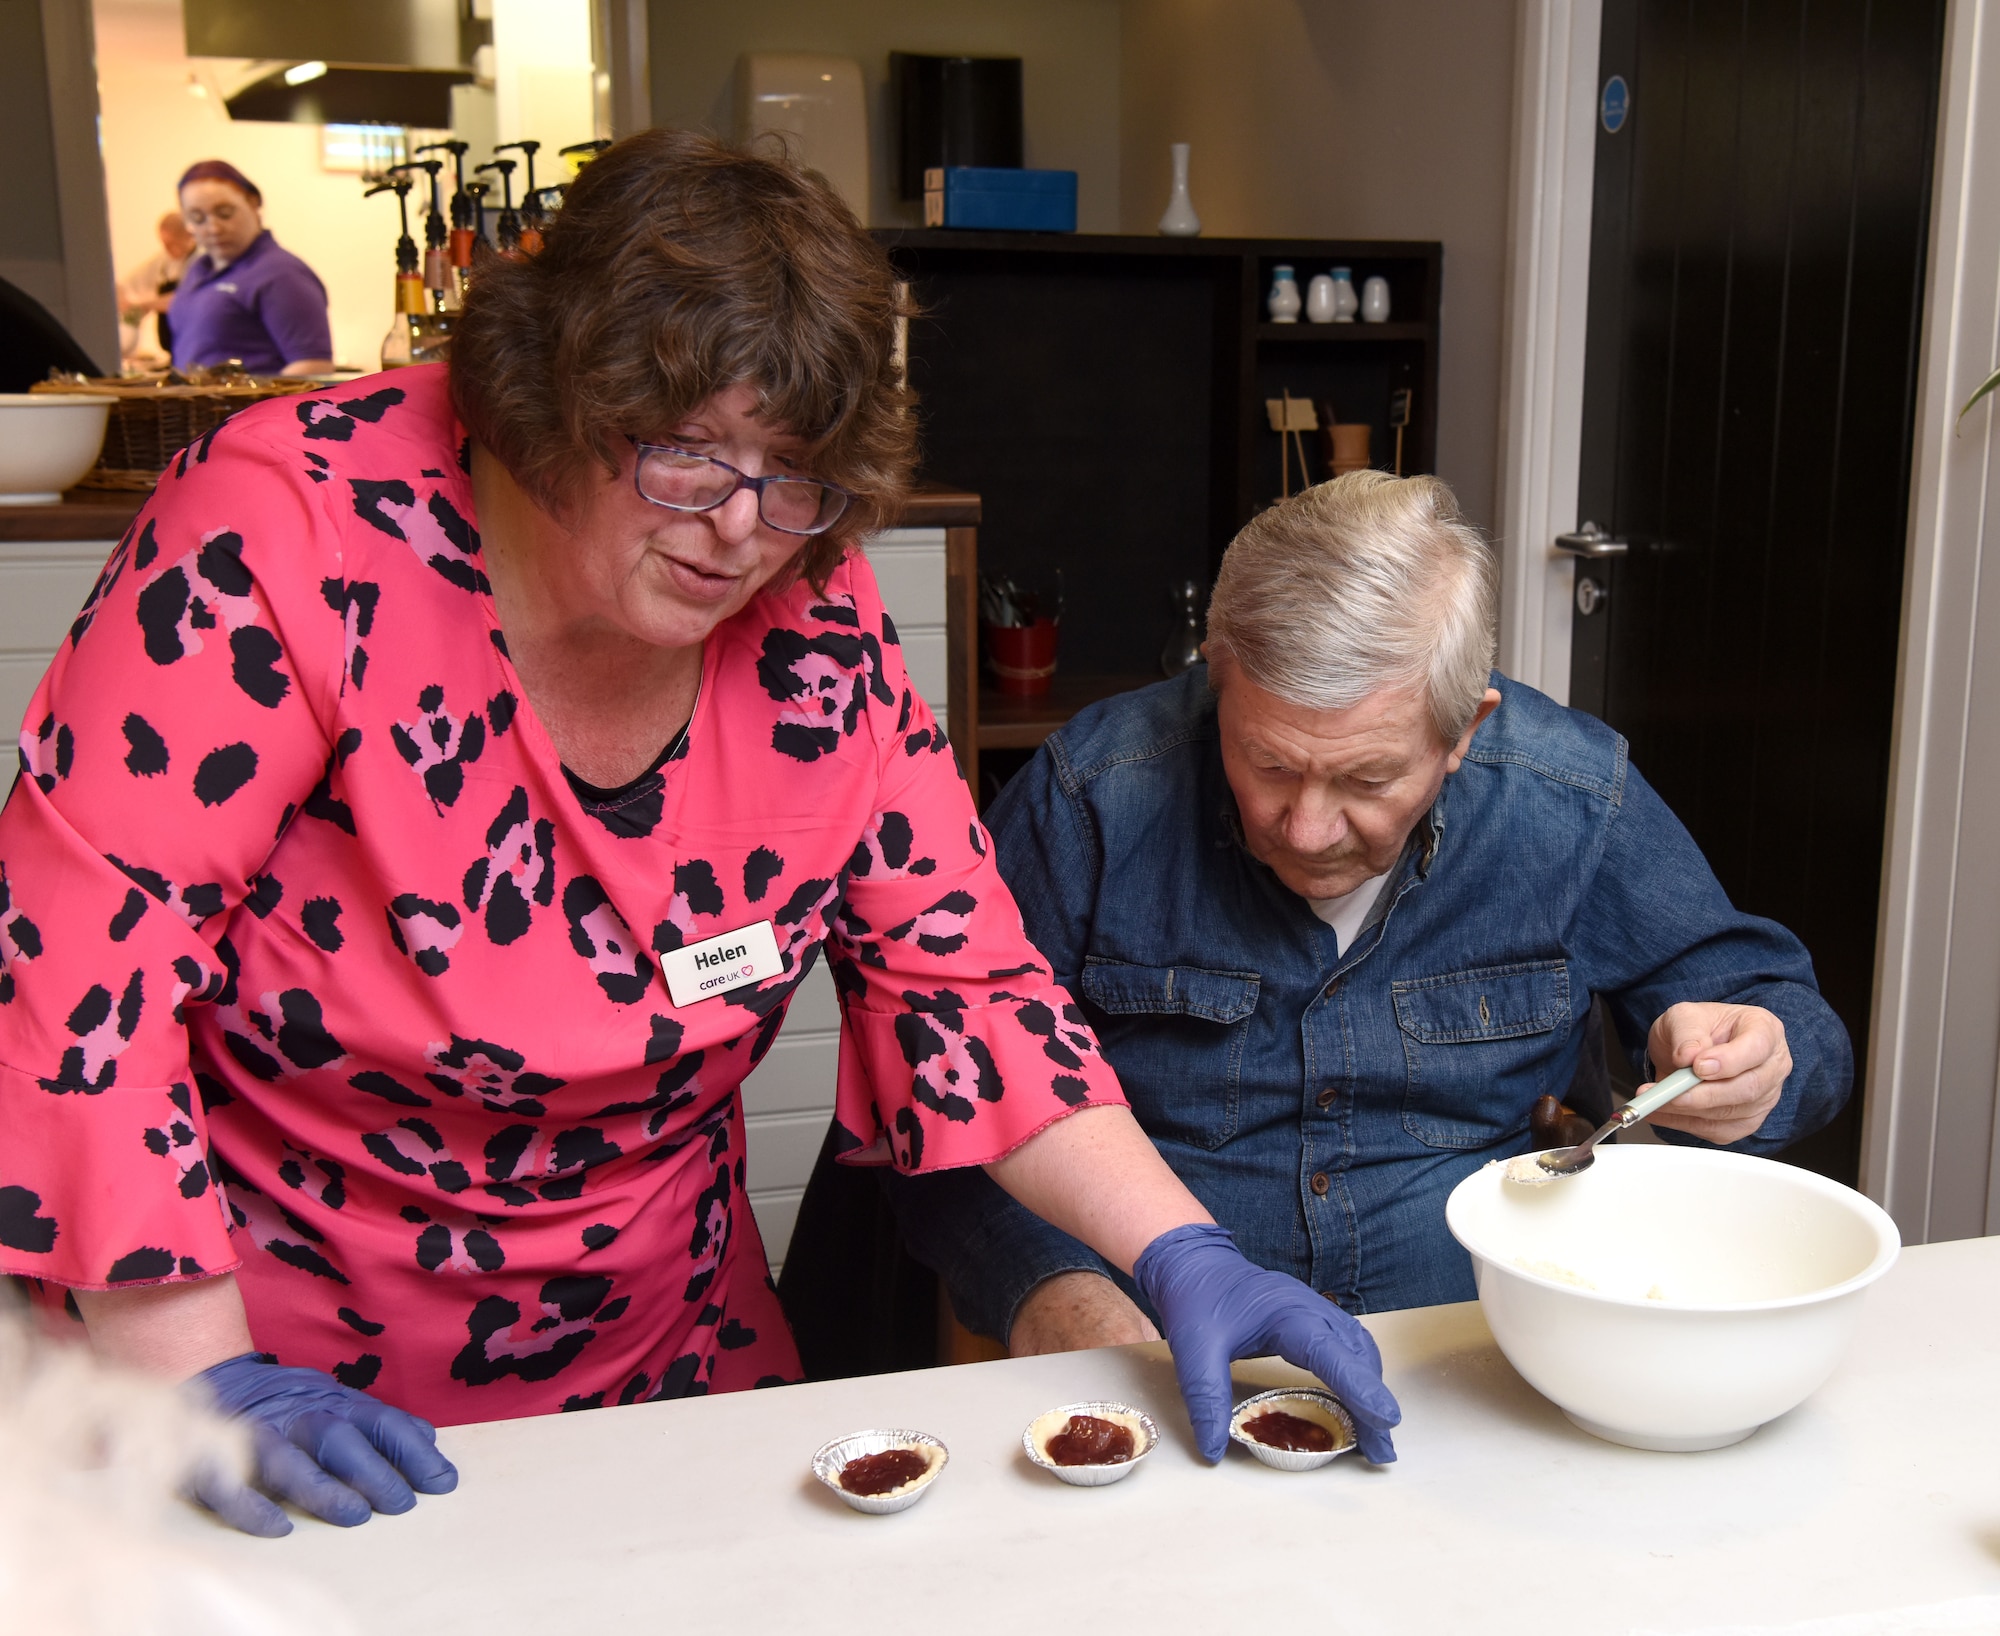 Helen Butcher, left, Mildenhall Lodge Care Home lifestyle coordinator, and Richard, a care home resident, make apple and blackberry pies at Mildenhall Lodge Care Home, Mildenhall, England, March 9, 2023. Team Mildenhall Airmen volunteered at the care home, tidying the garden, planting spring flowers and baking with the residents. (U.S. Air Force photo by Karen Abeyasekere)